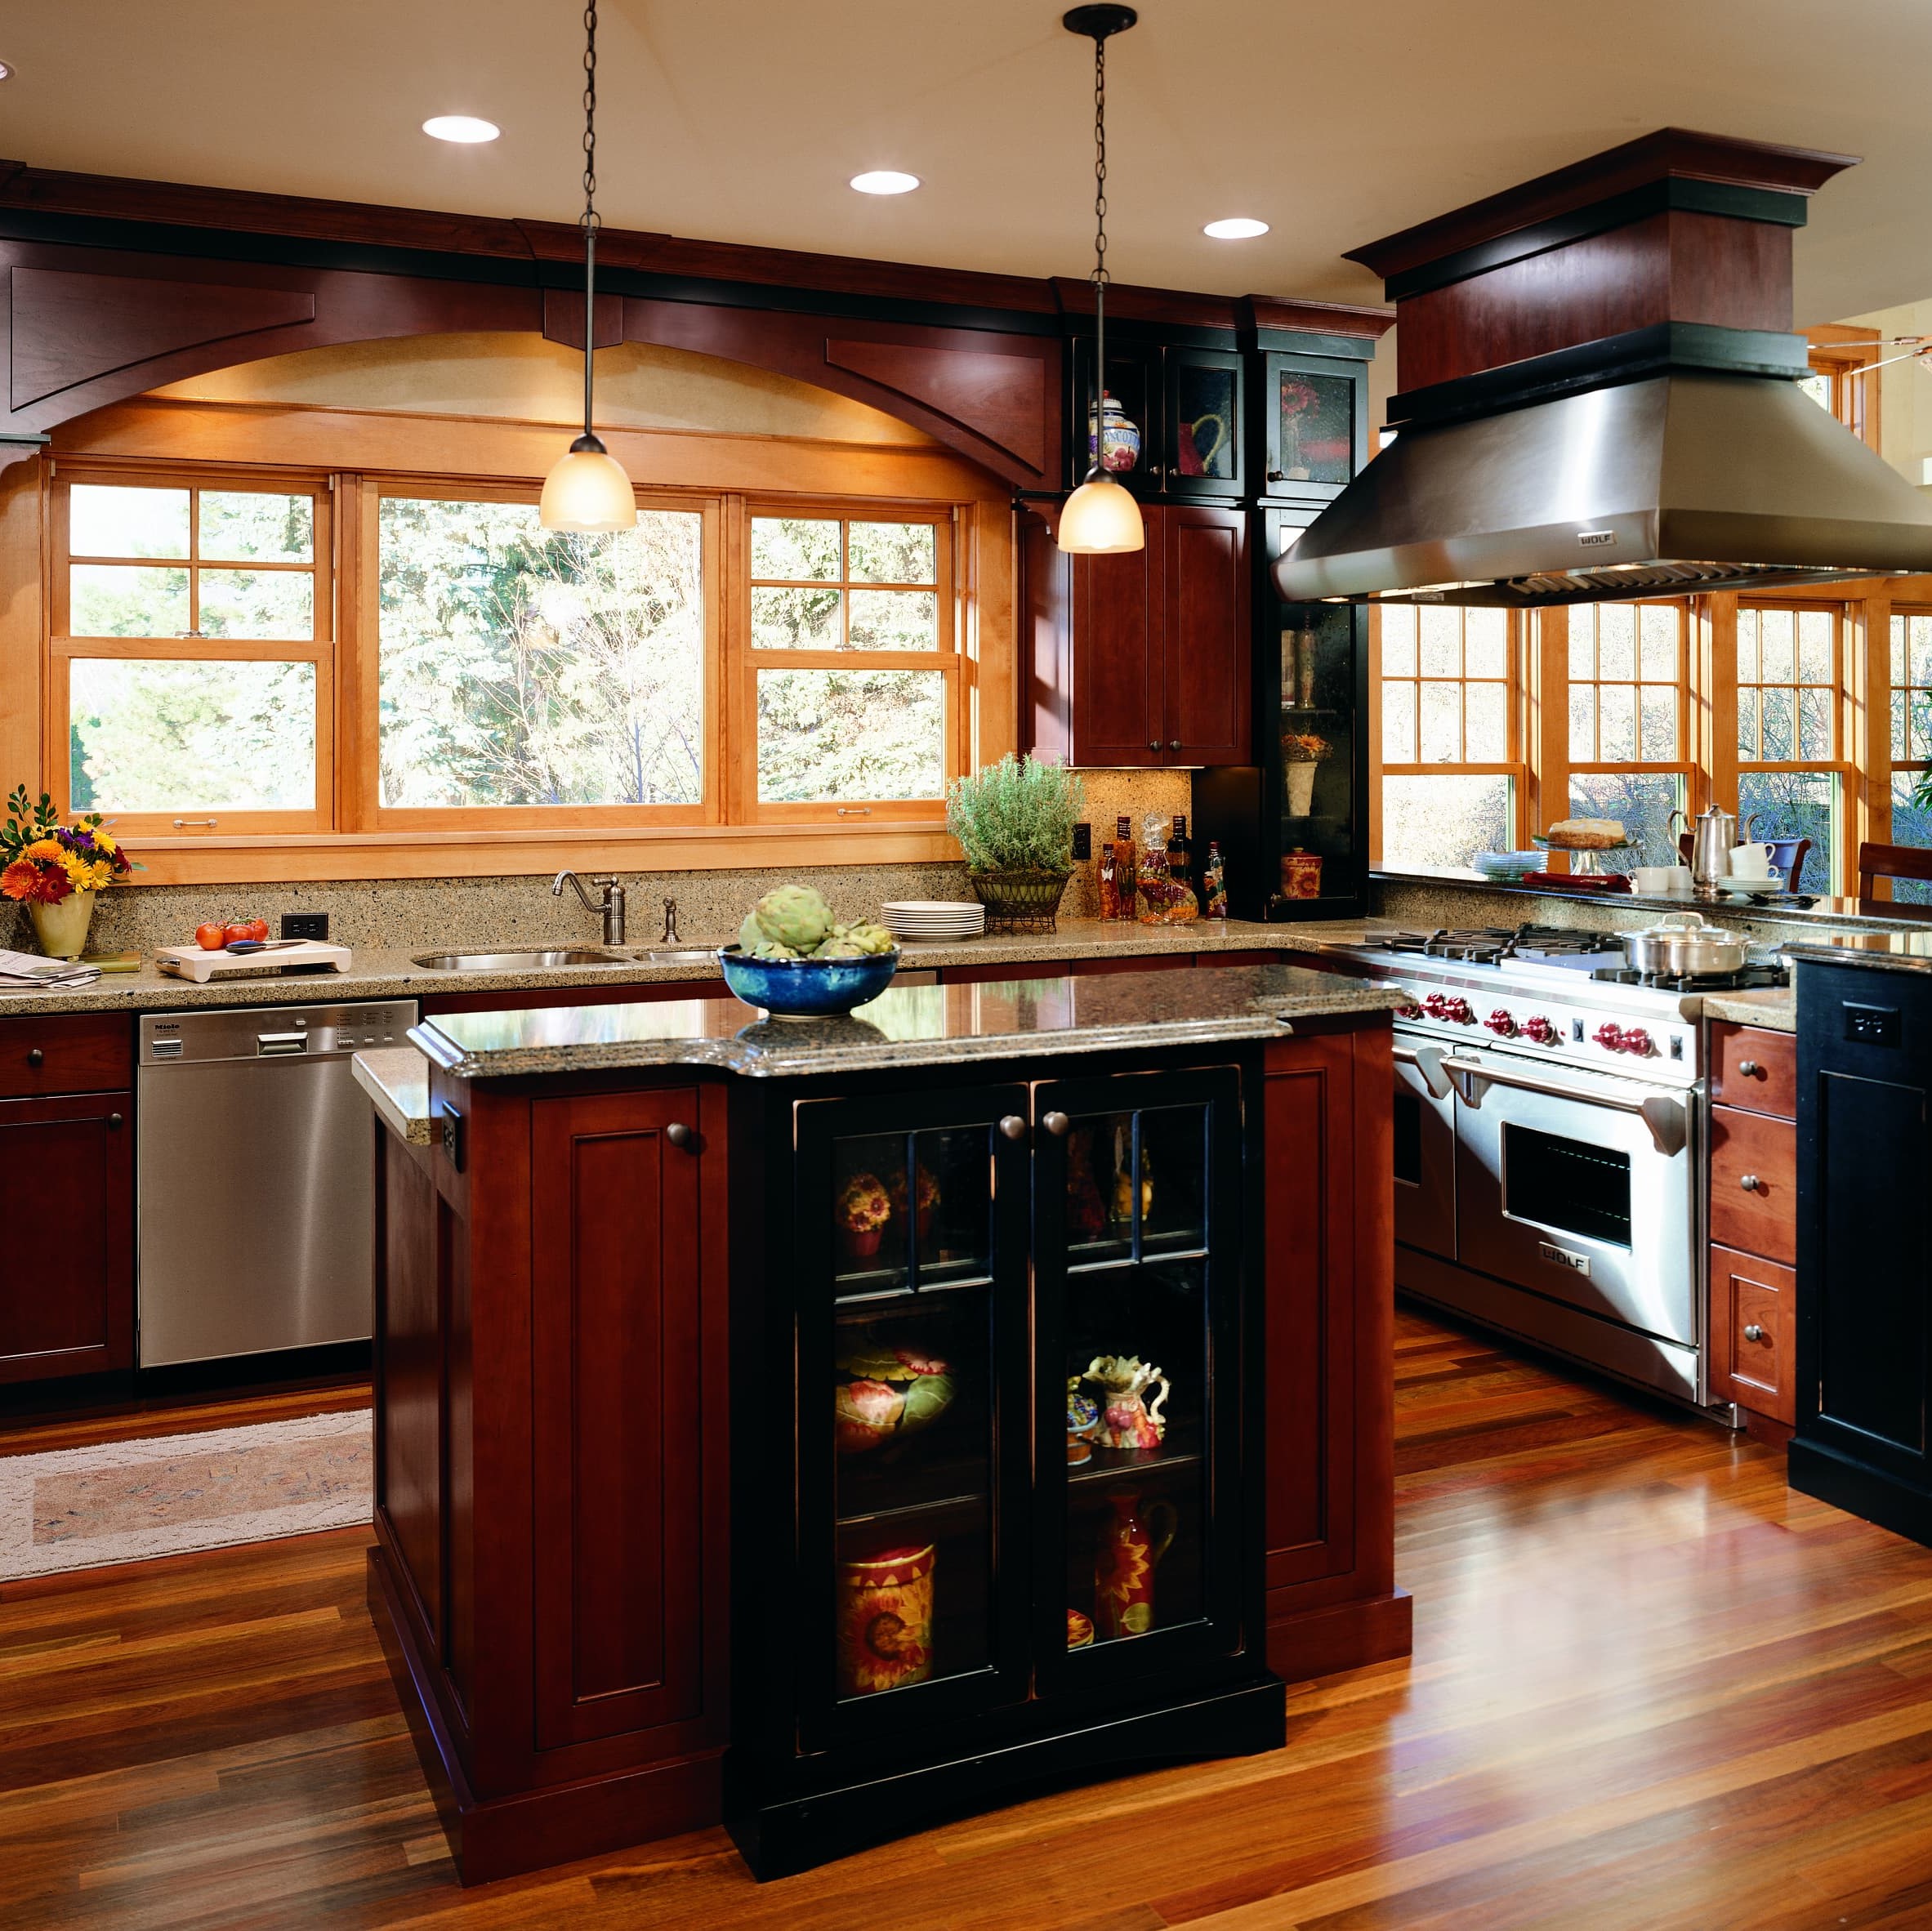 Double hung windows in kitchen